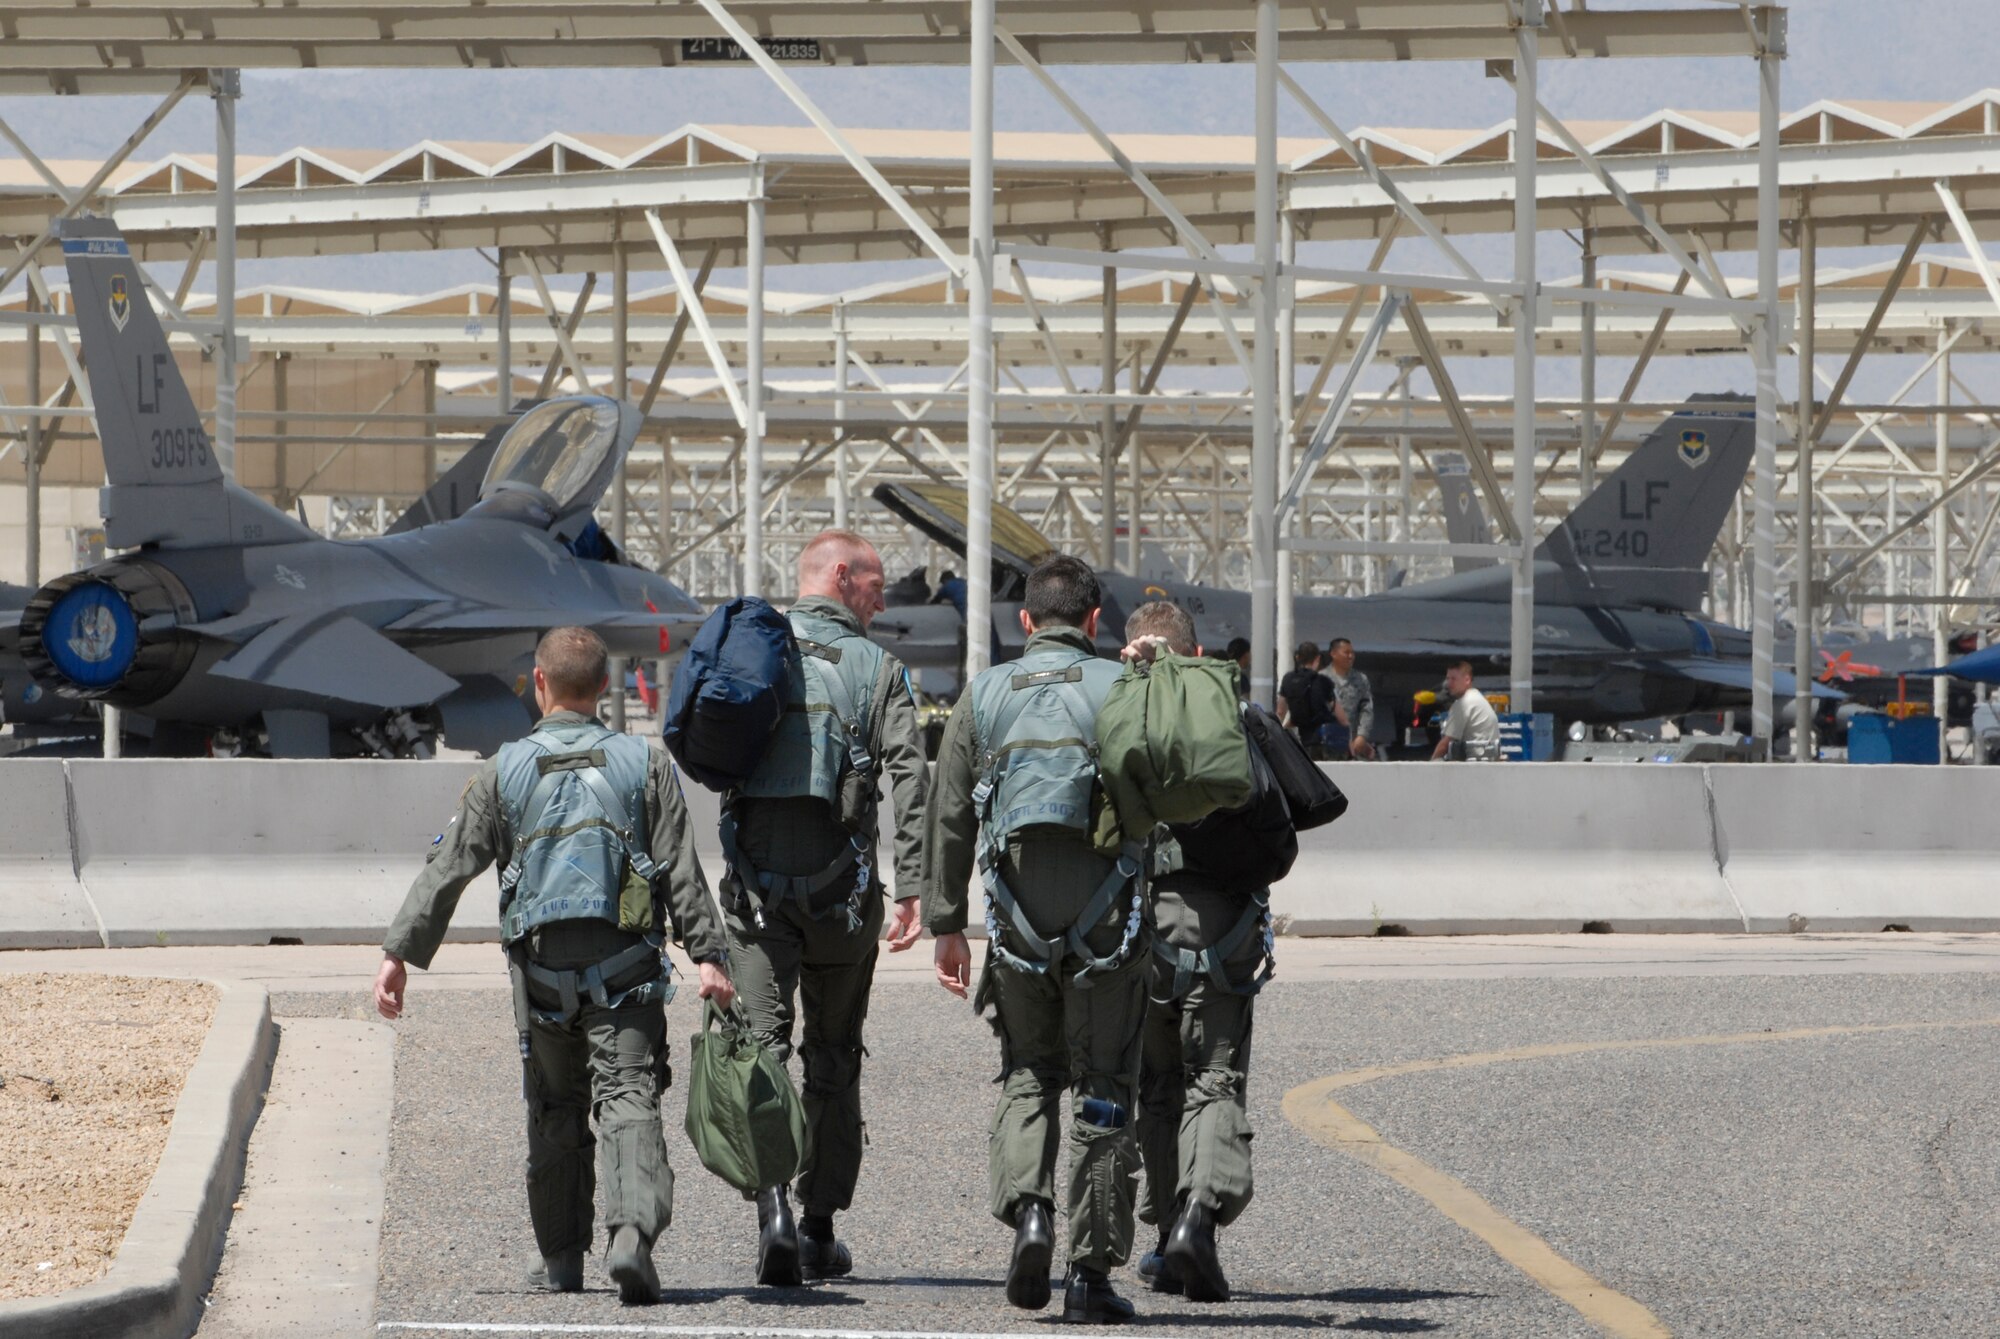 Pilots with the 309th Fighter Squadron step to their aircraft for a training mission, Apr. 28. The 309th FS is one of eight fighter squadrons that make Luke Air Force Base the largest fighter wing in the world. (U.S. Air Force photo/Staff Sergeant Christopher Hummel)